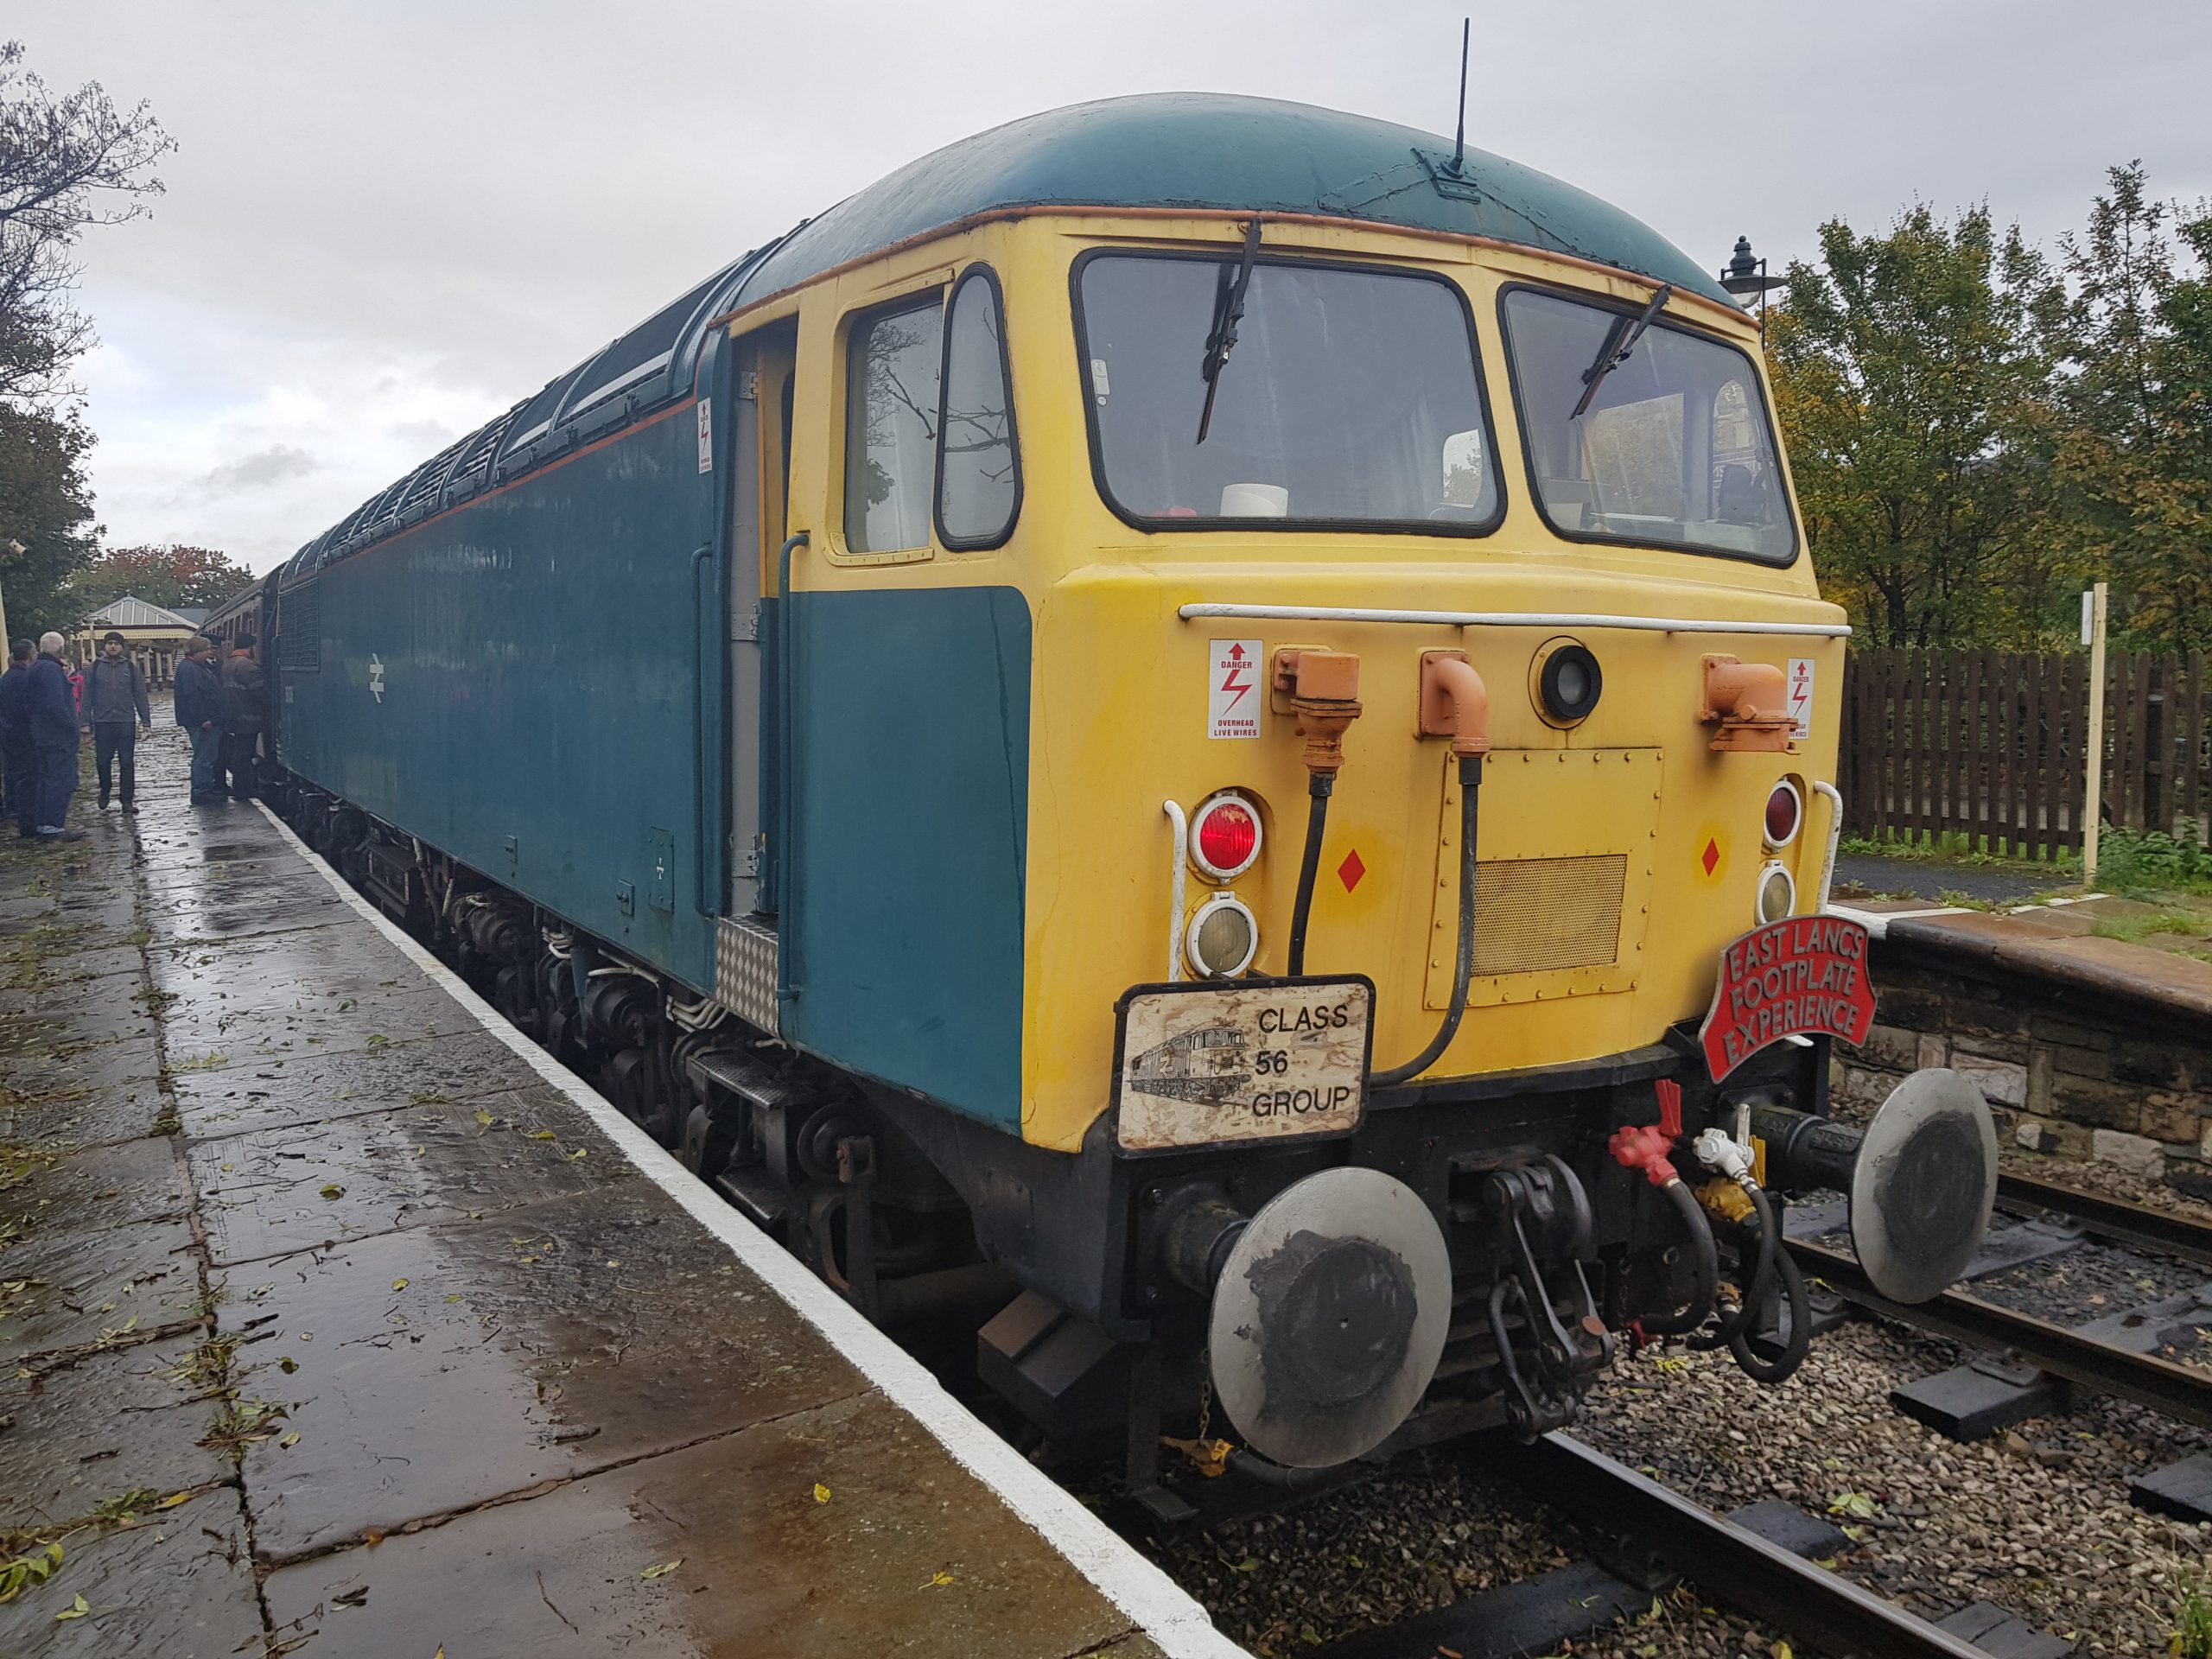 56006 Footplate experience dates-May 30th (Sat) 2020 and September 17th (Thur) 2020